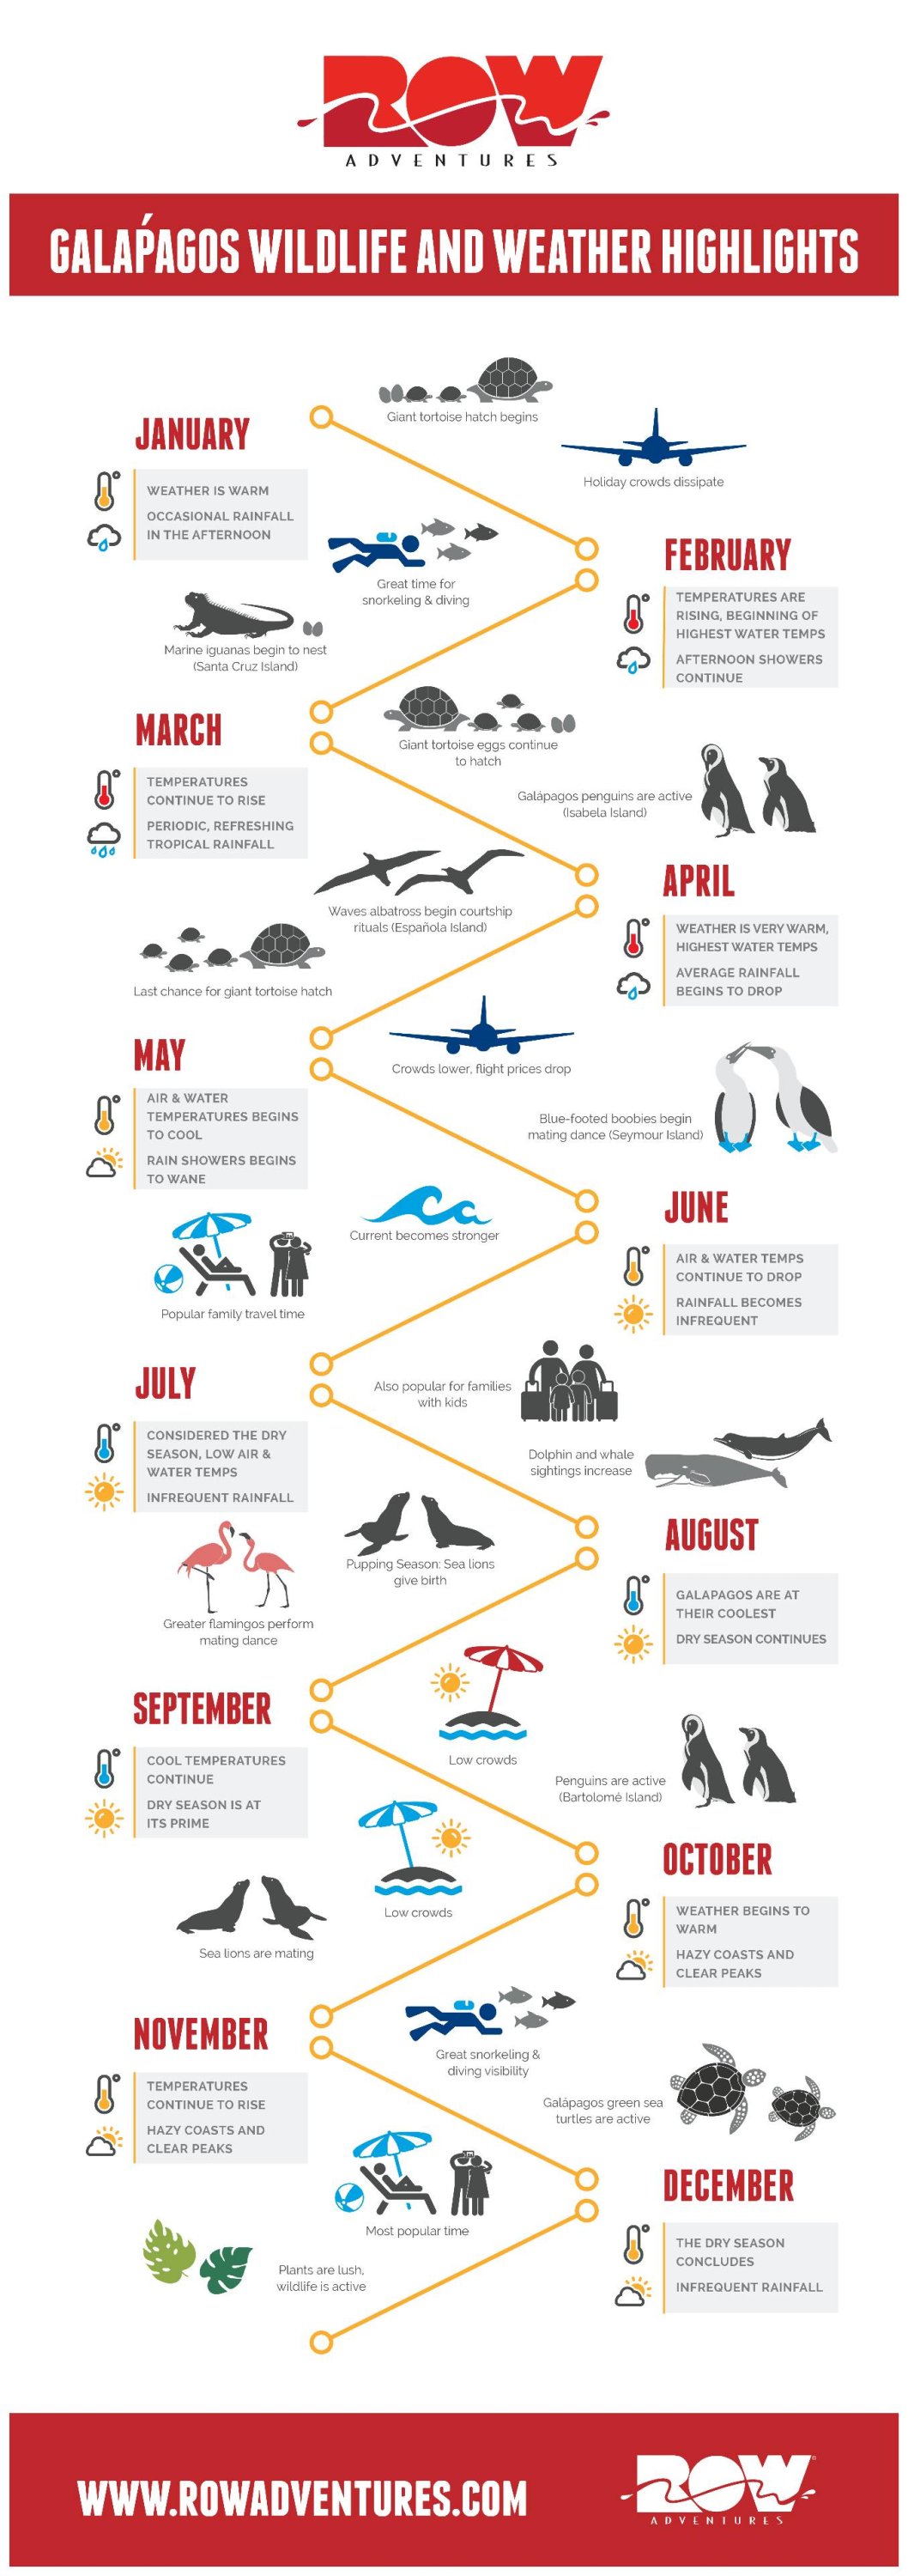 Wildlife and weather highlights infographic in the Galapagos Islands